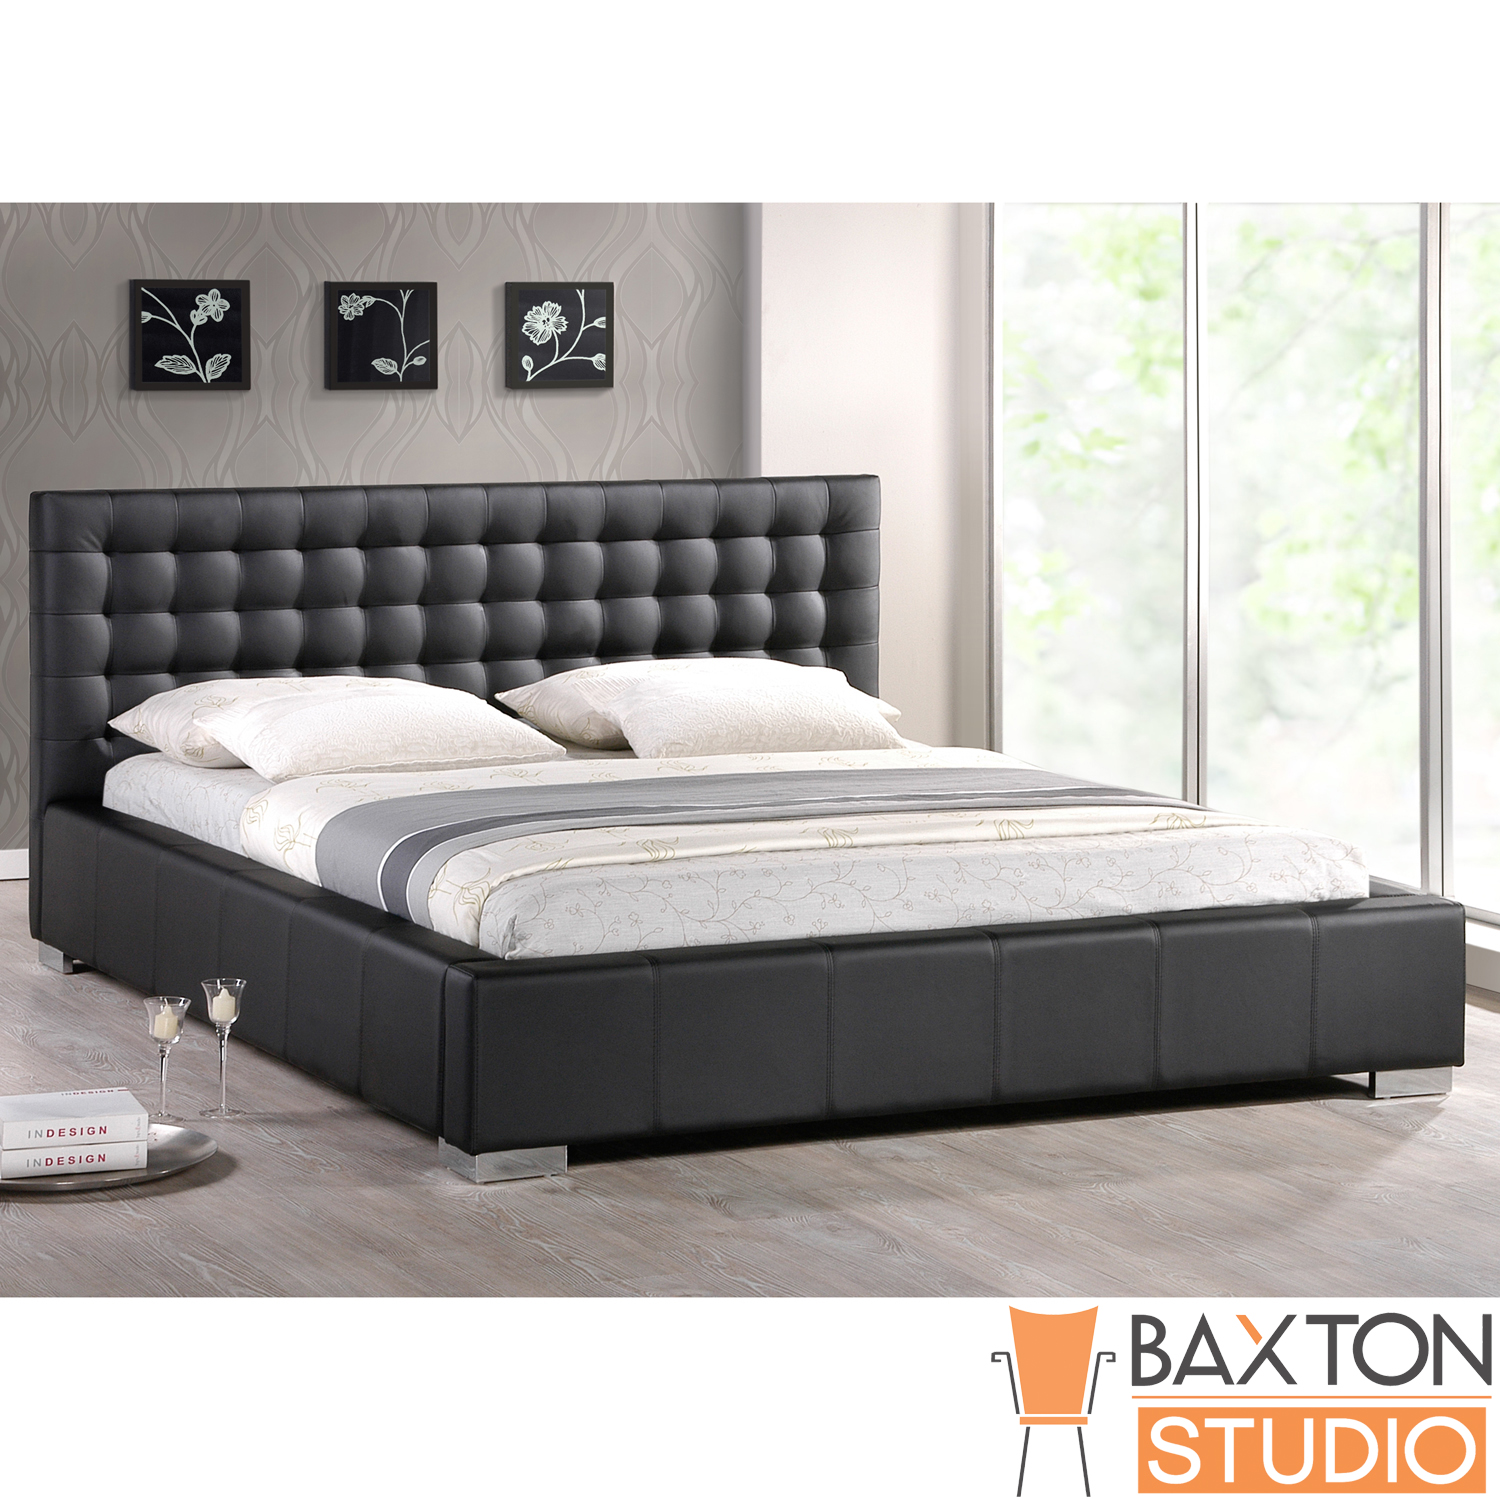 Baxton Studio Madison Black Modern Bed with Upholstered Headboard (Queen Size)